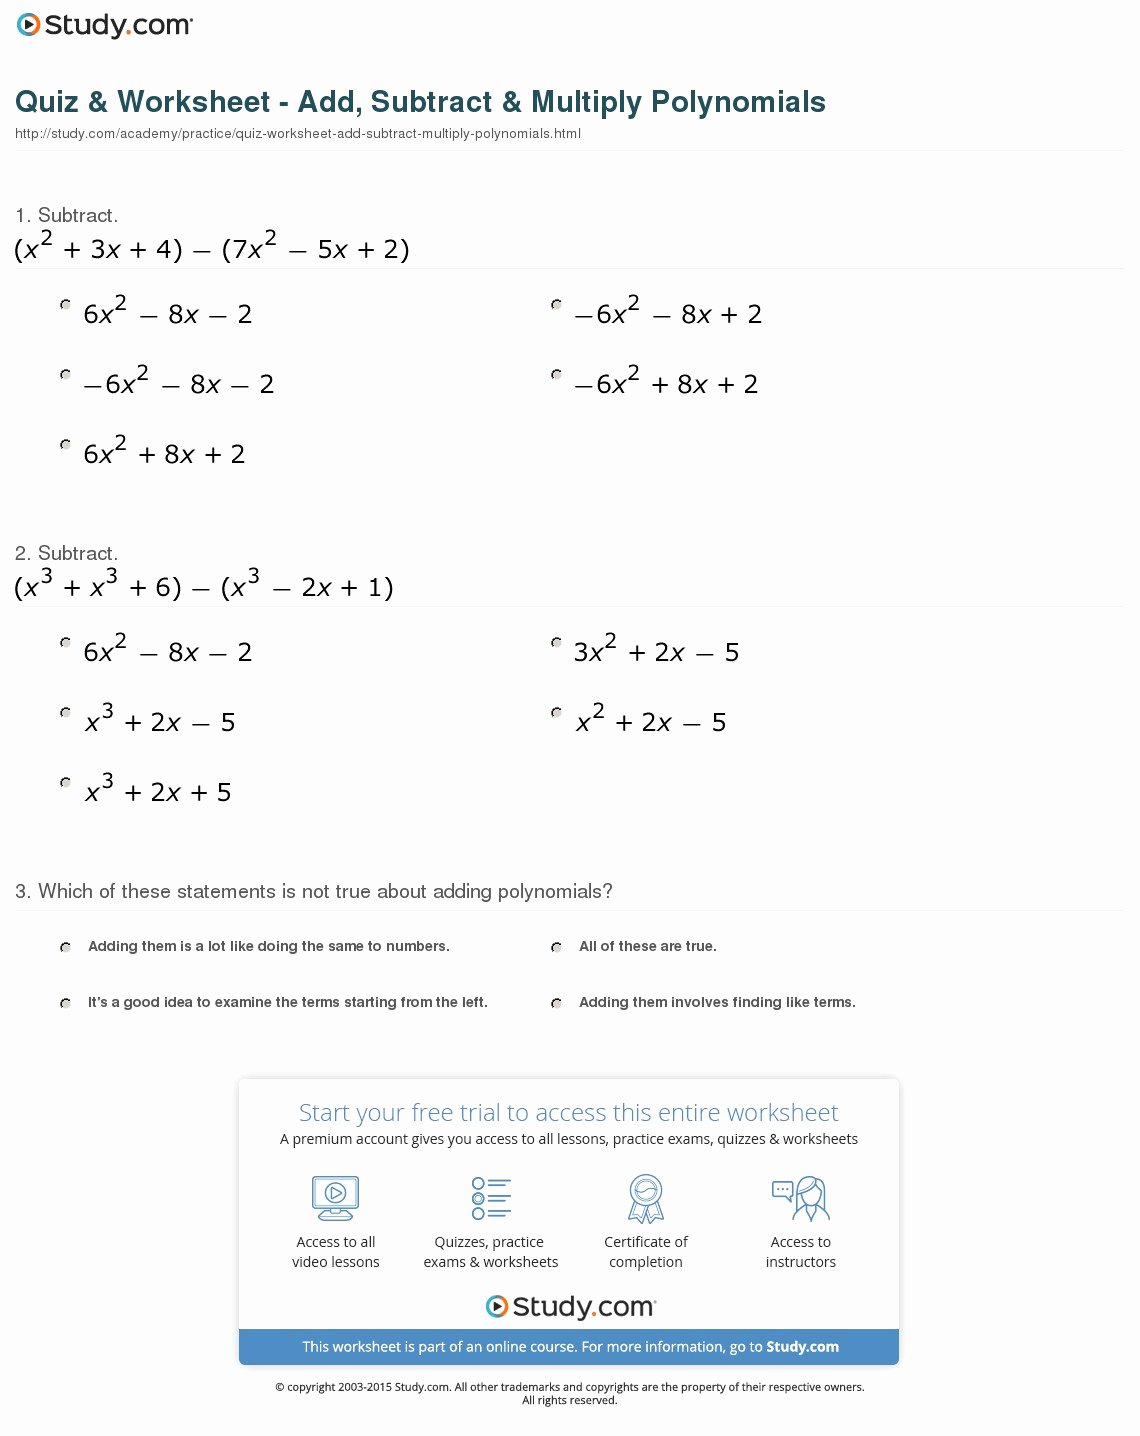 Multiplying Polynomials Worksheet 1 Answers Beautiful Quiz &amp; Worksheet Add Subtract &amp; Multiply Polynomials